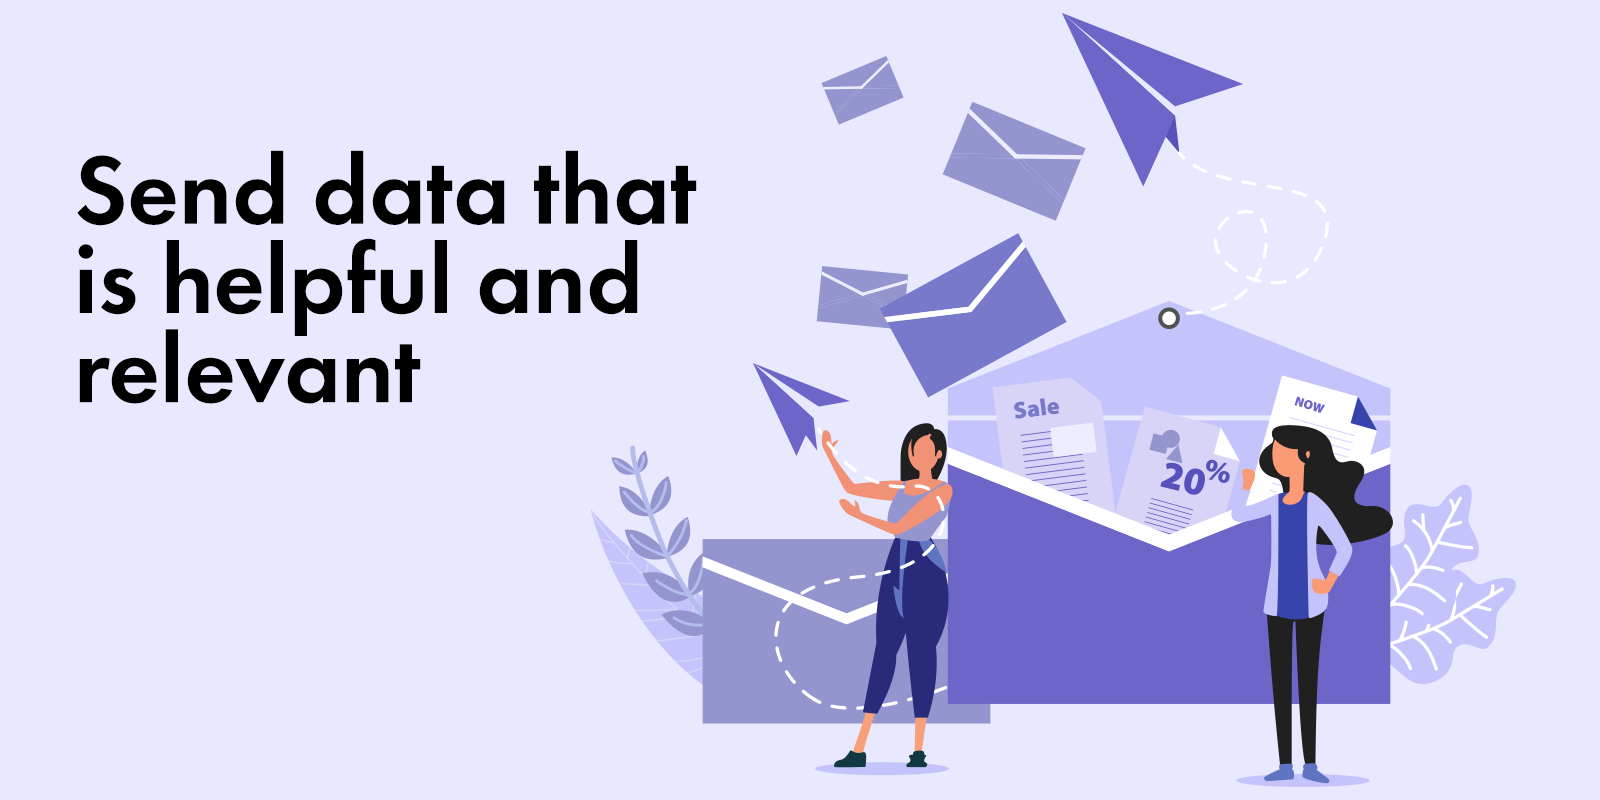 Send data that is helpful in email marketing